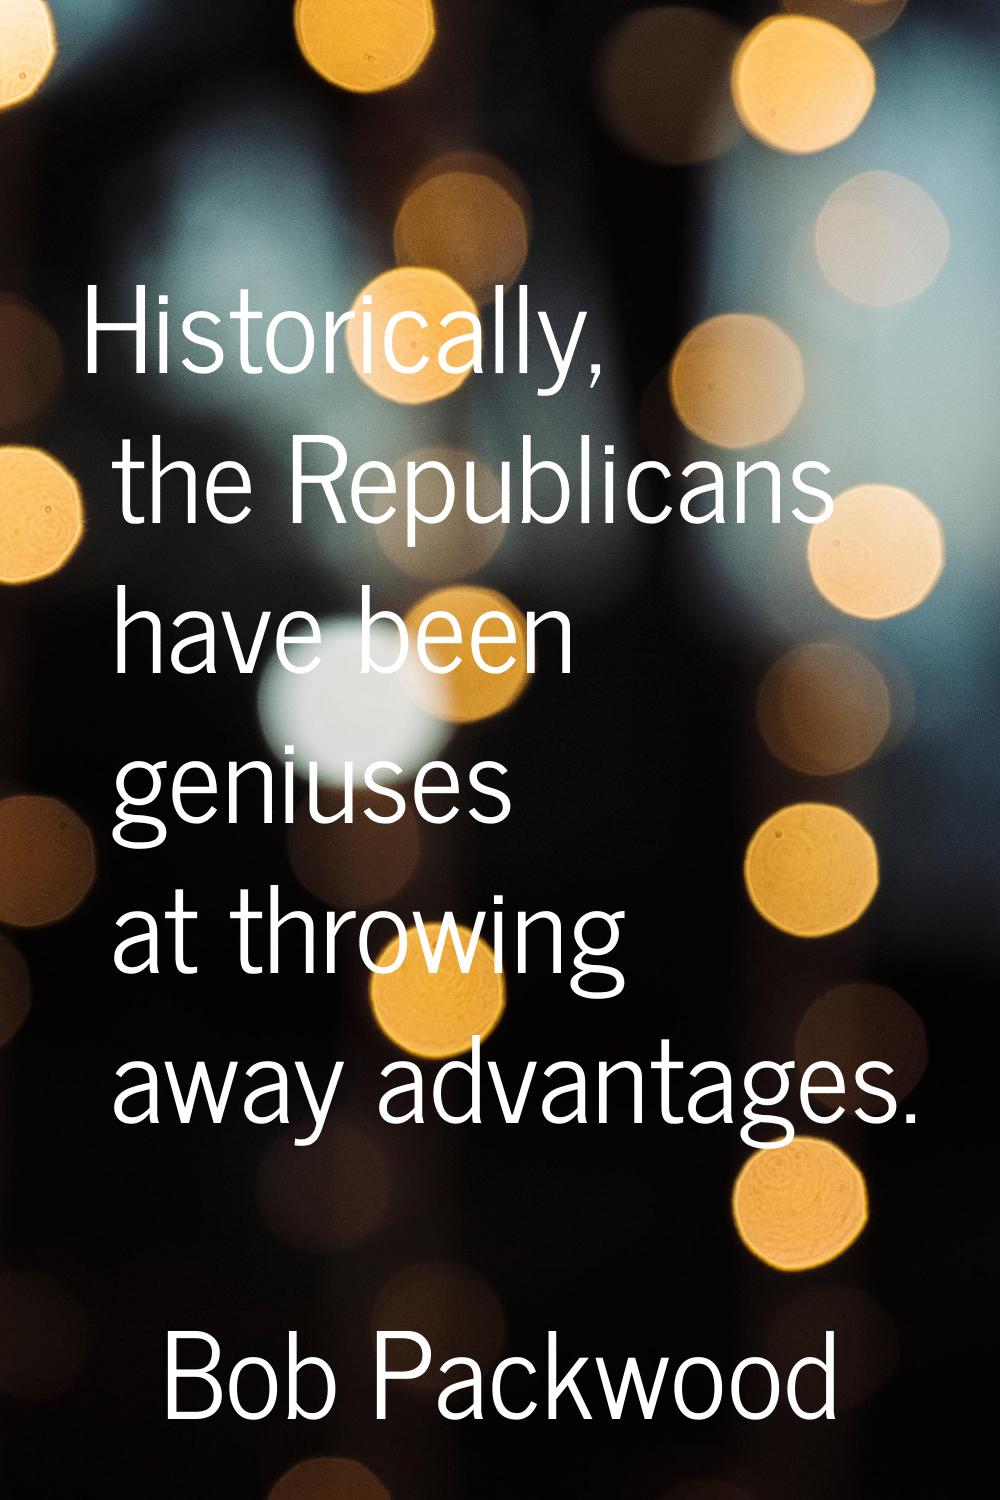 Historically, the Republicans have been geniuses at throwing away advantages.